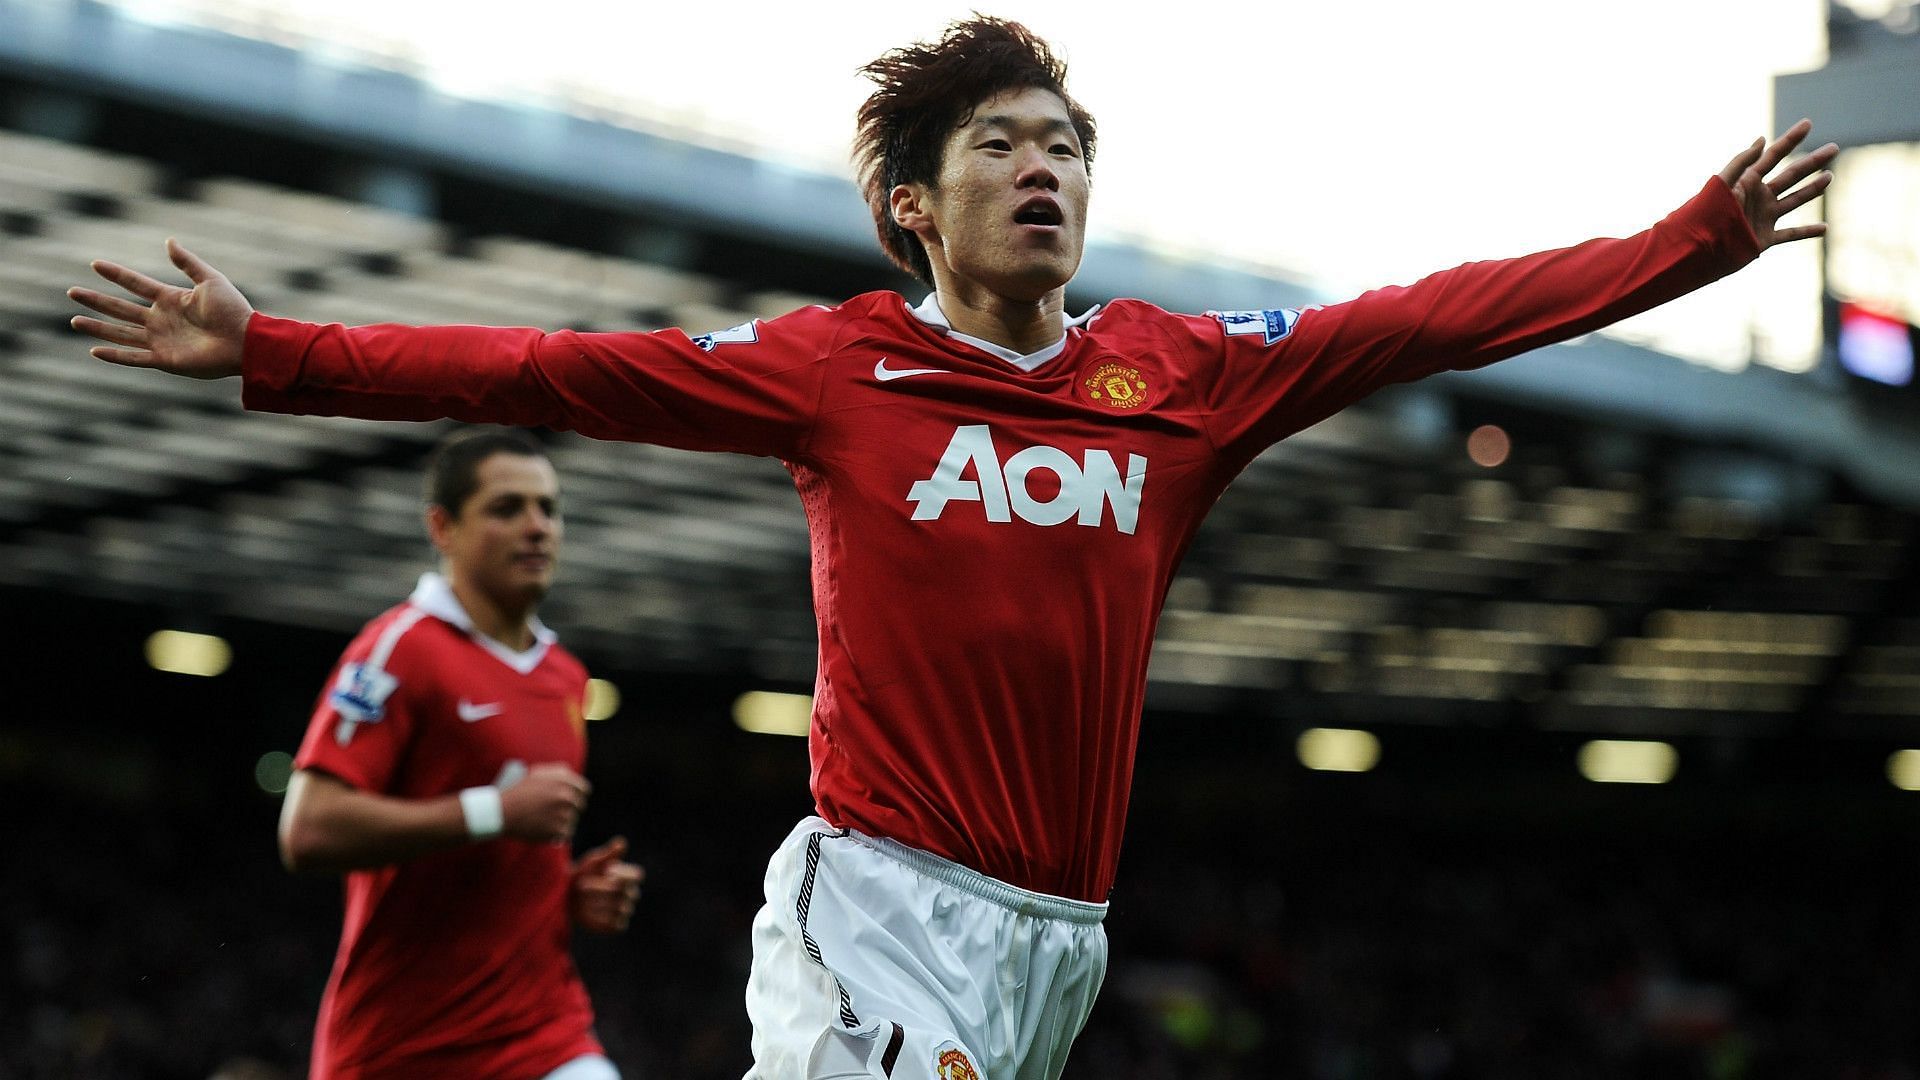 Park Ji-sung is one Manchester United player the streets will never forget.